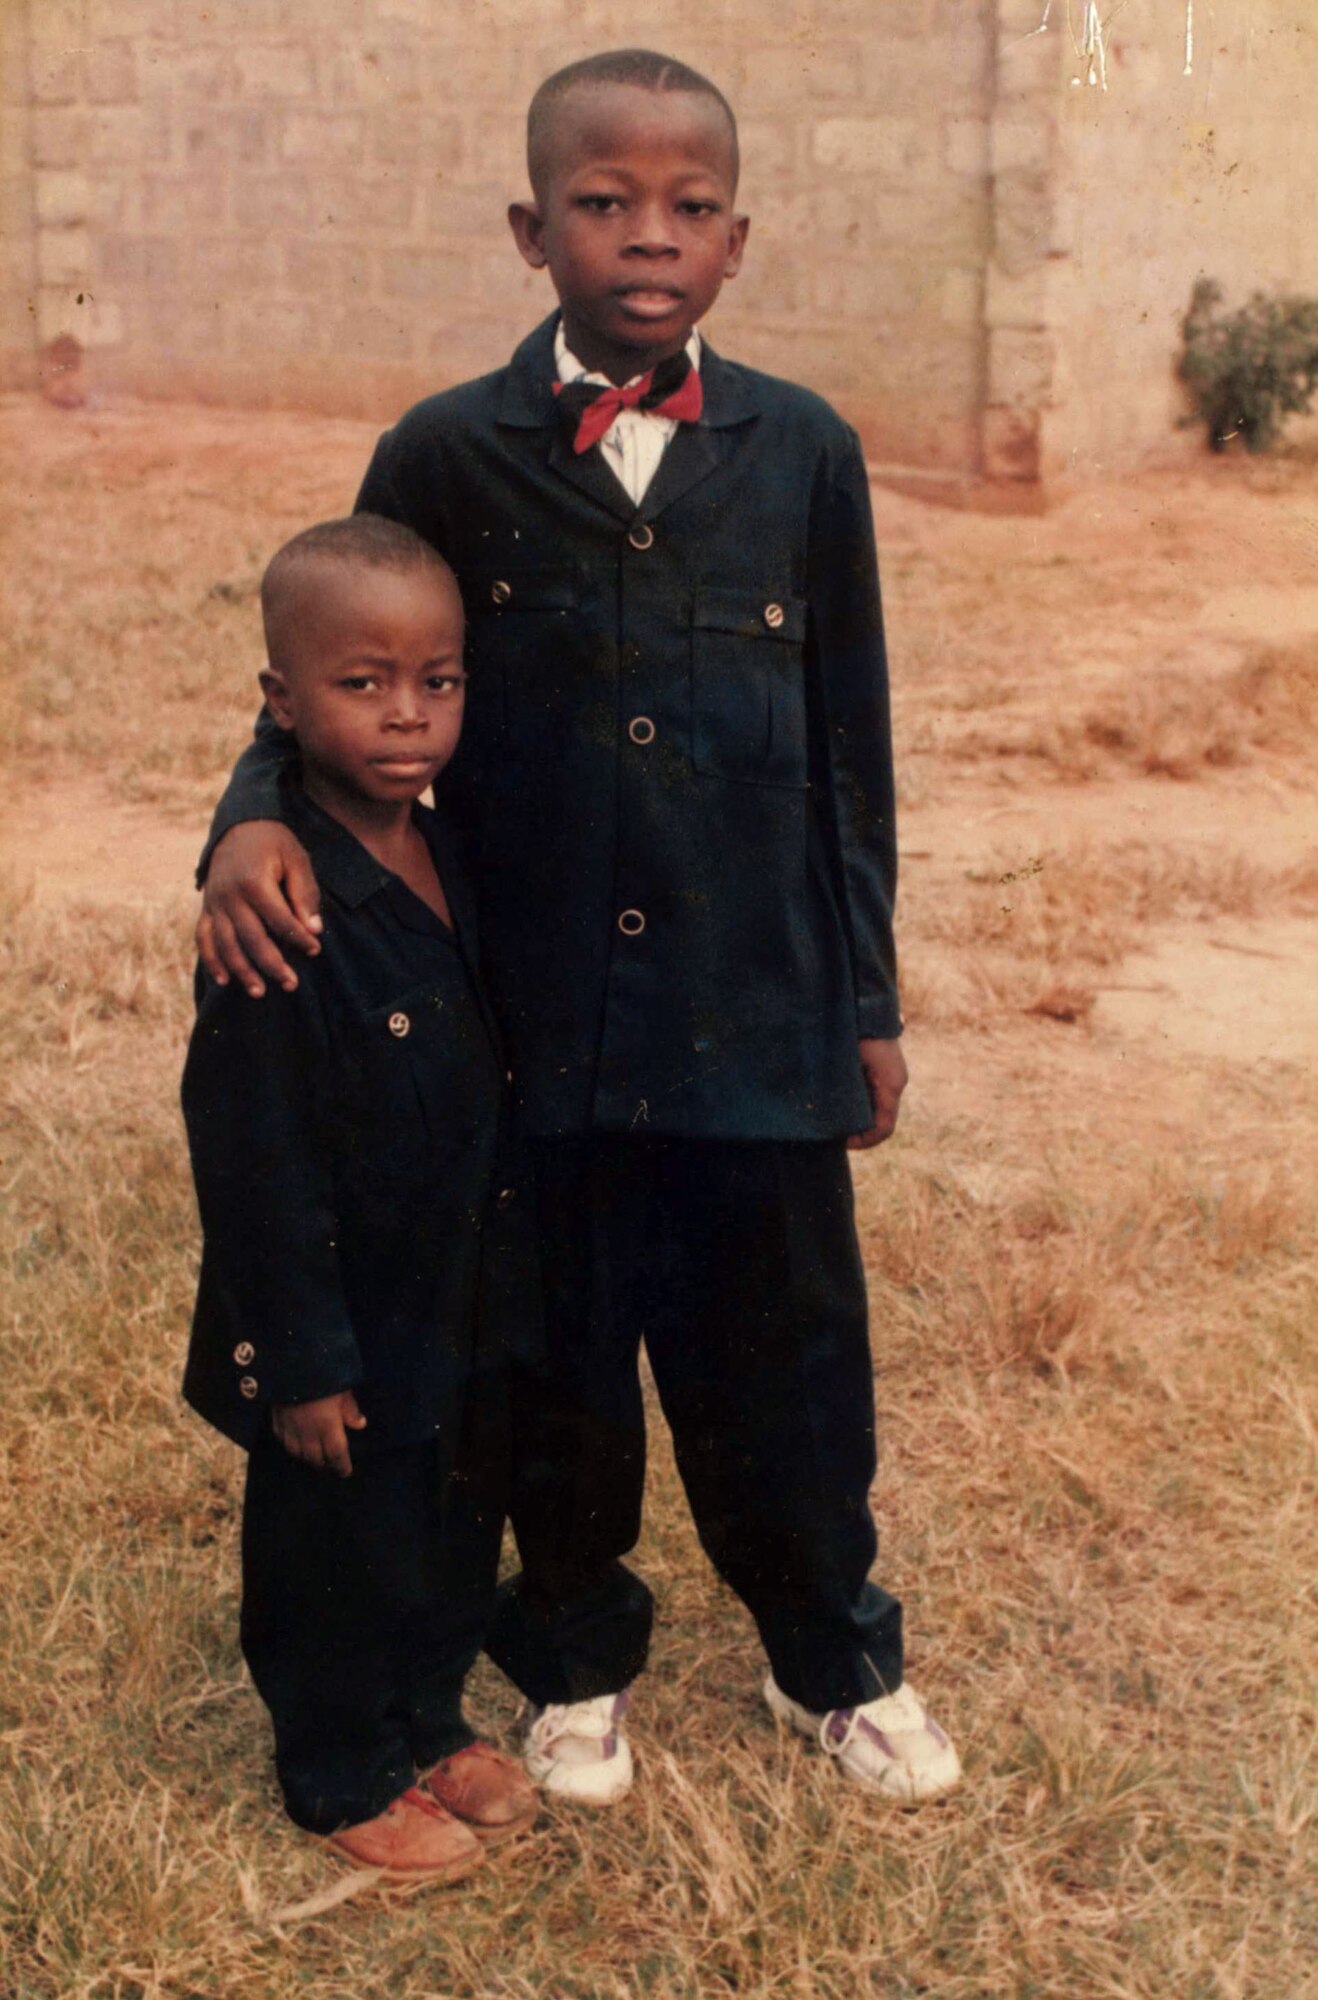 Airman 1st Class Kofi Combey Douhadji, 92nd Logistics Readiness Squadron vehicle operator, poses for a photo with his younger brother in Togo, where he lived until his family was selected by the online Diversity Visa Program to immigrate the U.S. The program provides a limited number of visas each fiscal year to a class of immigrants known as “diversity immigrants” from countries with historically low rates of immigration to the U.S. (Courtesy Photo)